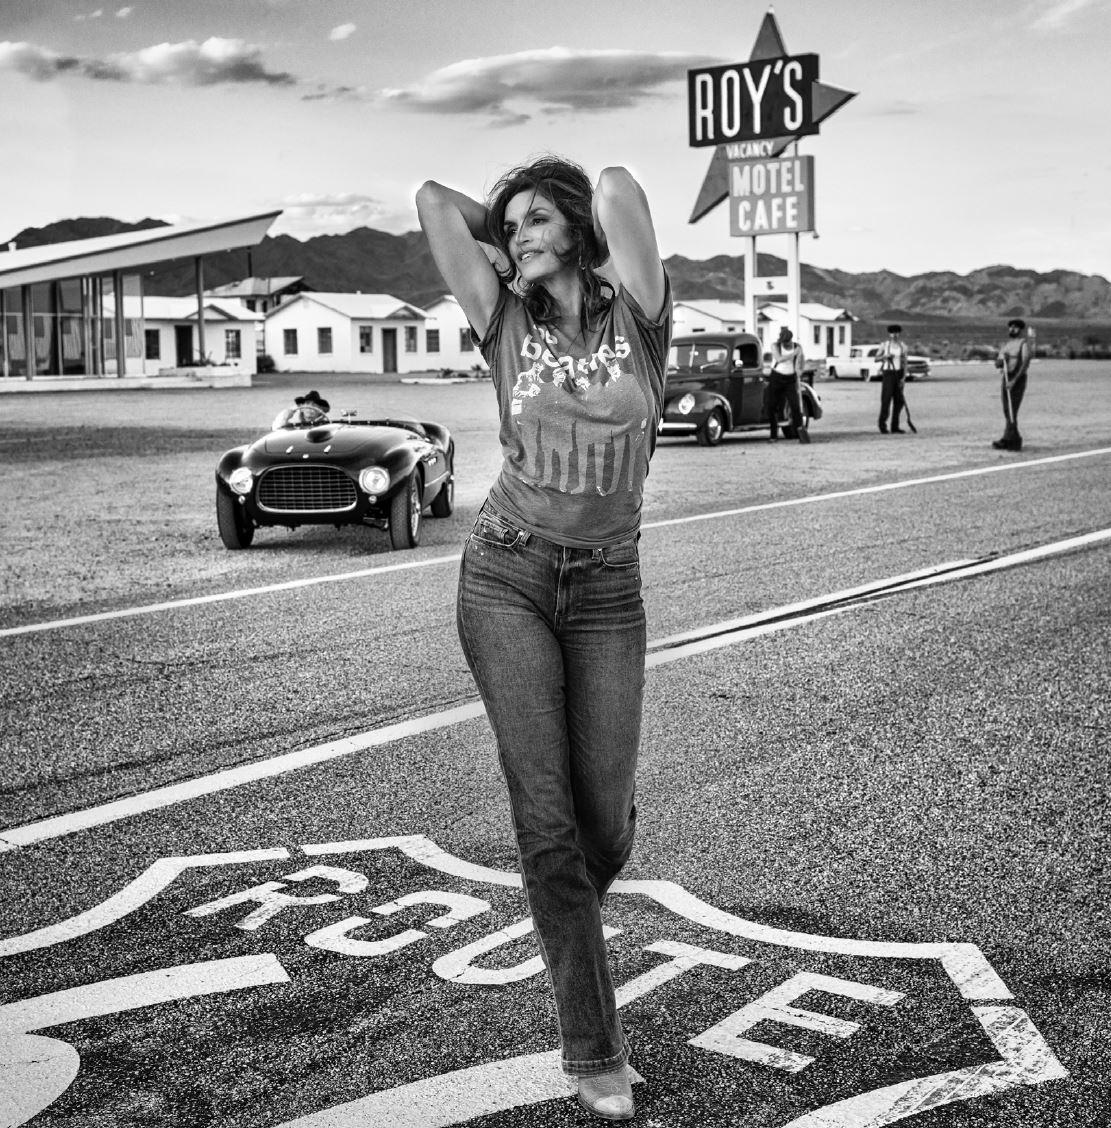 Roy's - Supermodel Cindy Crawford walking in front of 1950s motel on route 66